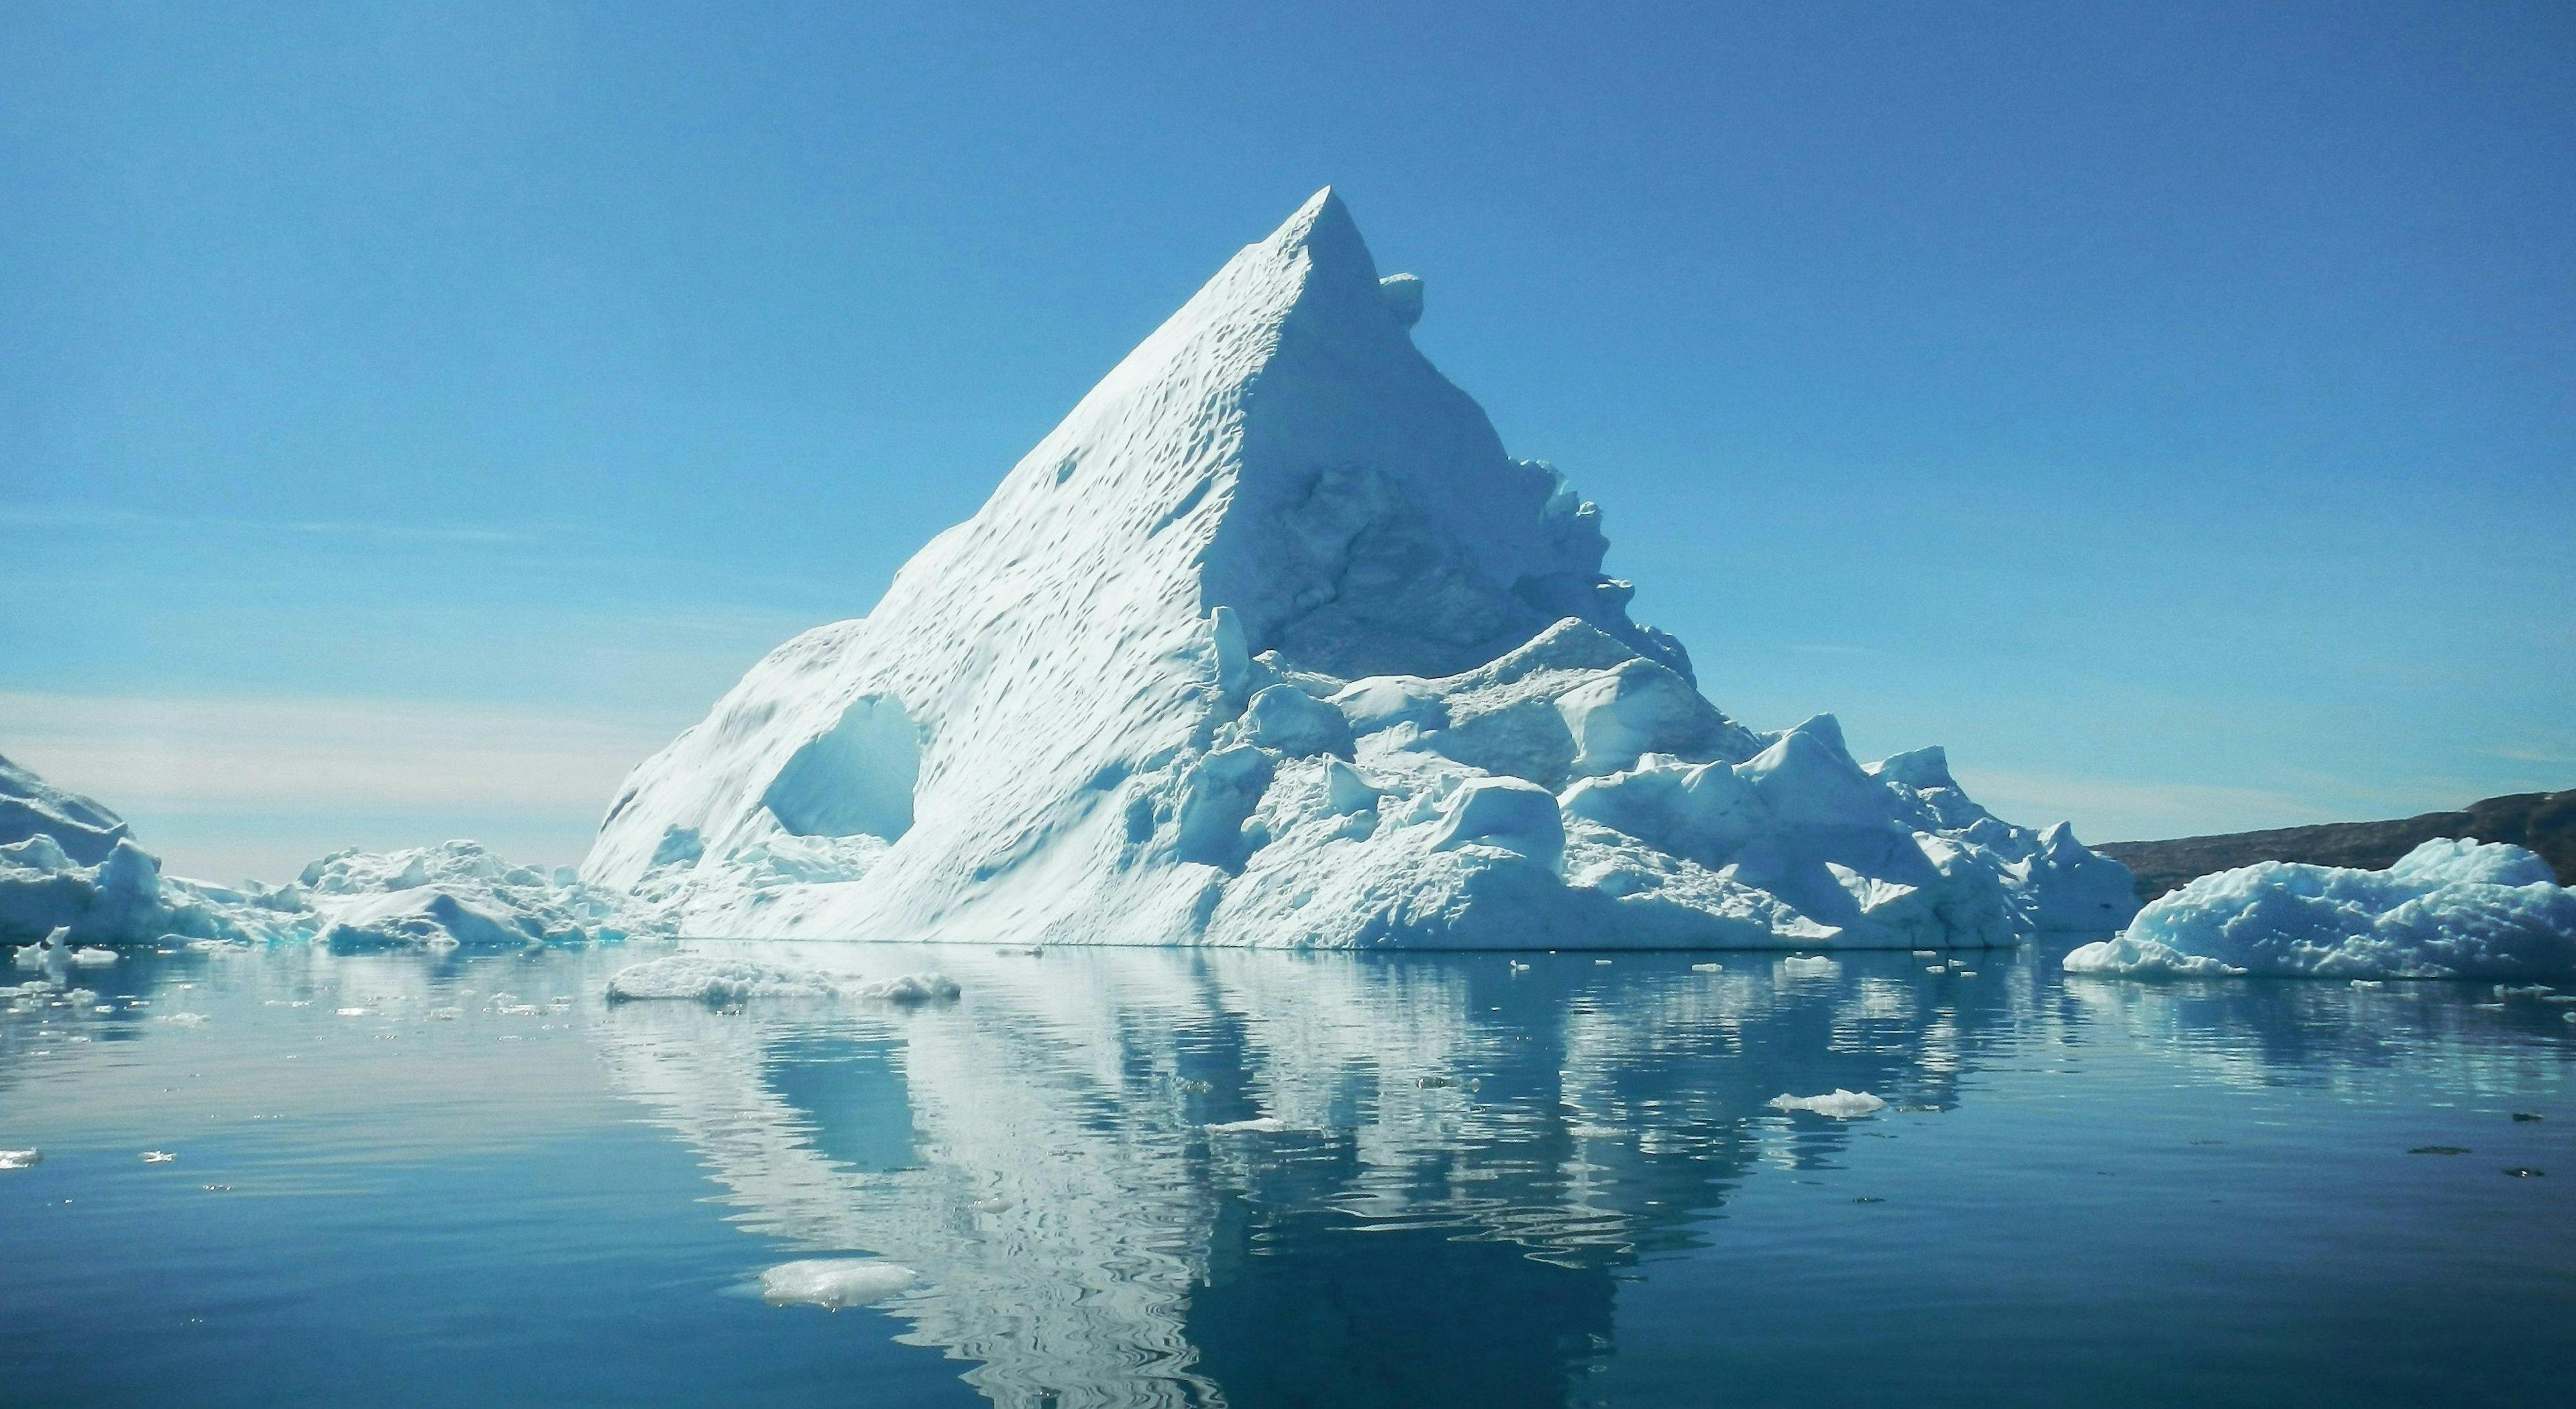 Large iceberg reflecting in calm, clear arctic waters under a bright blue sky, surrounded by smaller ice formations, suggesting a cold, remote environment.